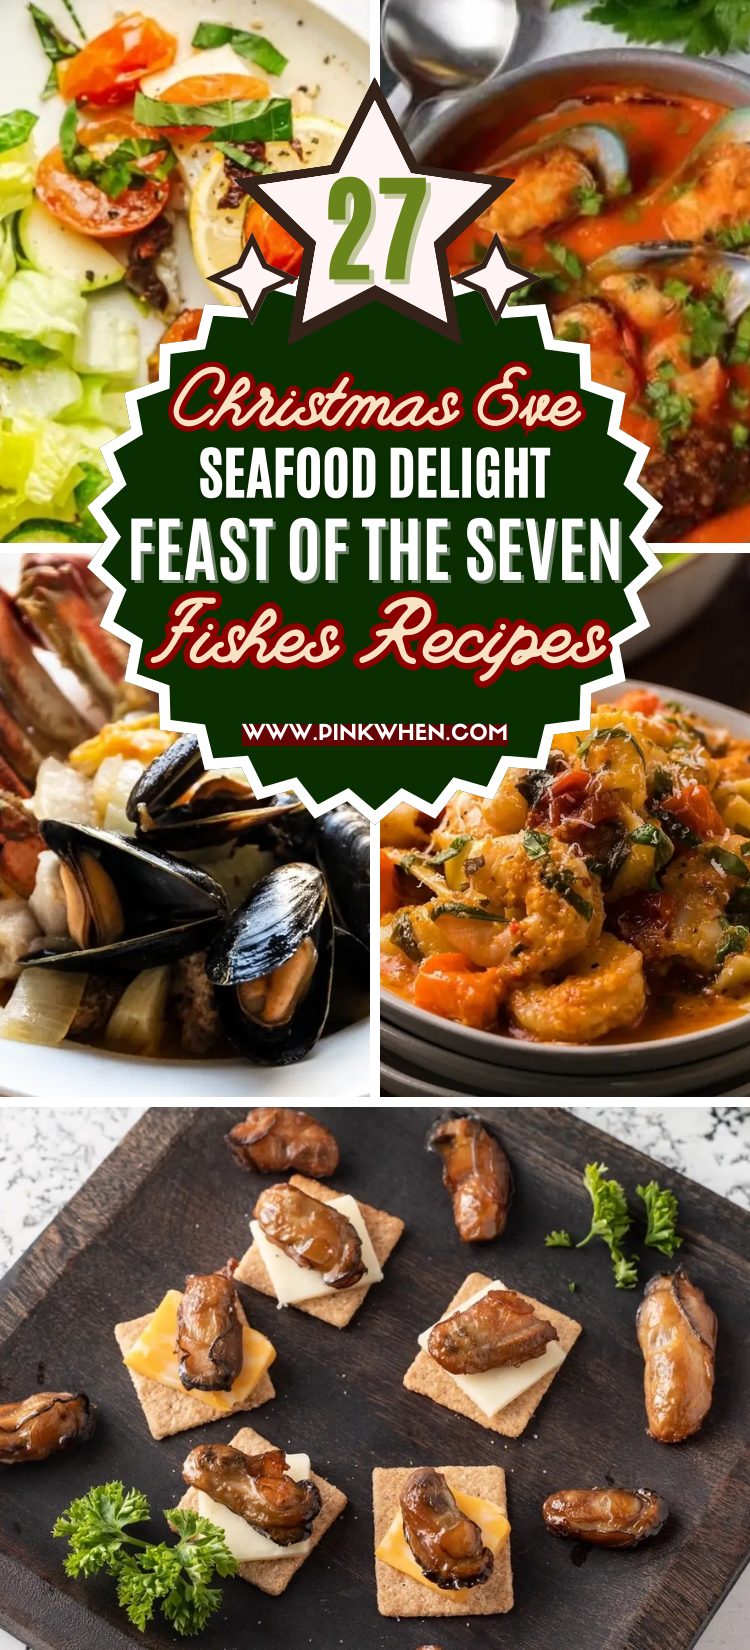 Christmas Eve Seafood Delight: 27 Feast of the Seven Fishes Recipes